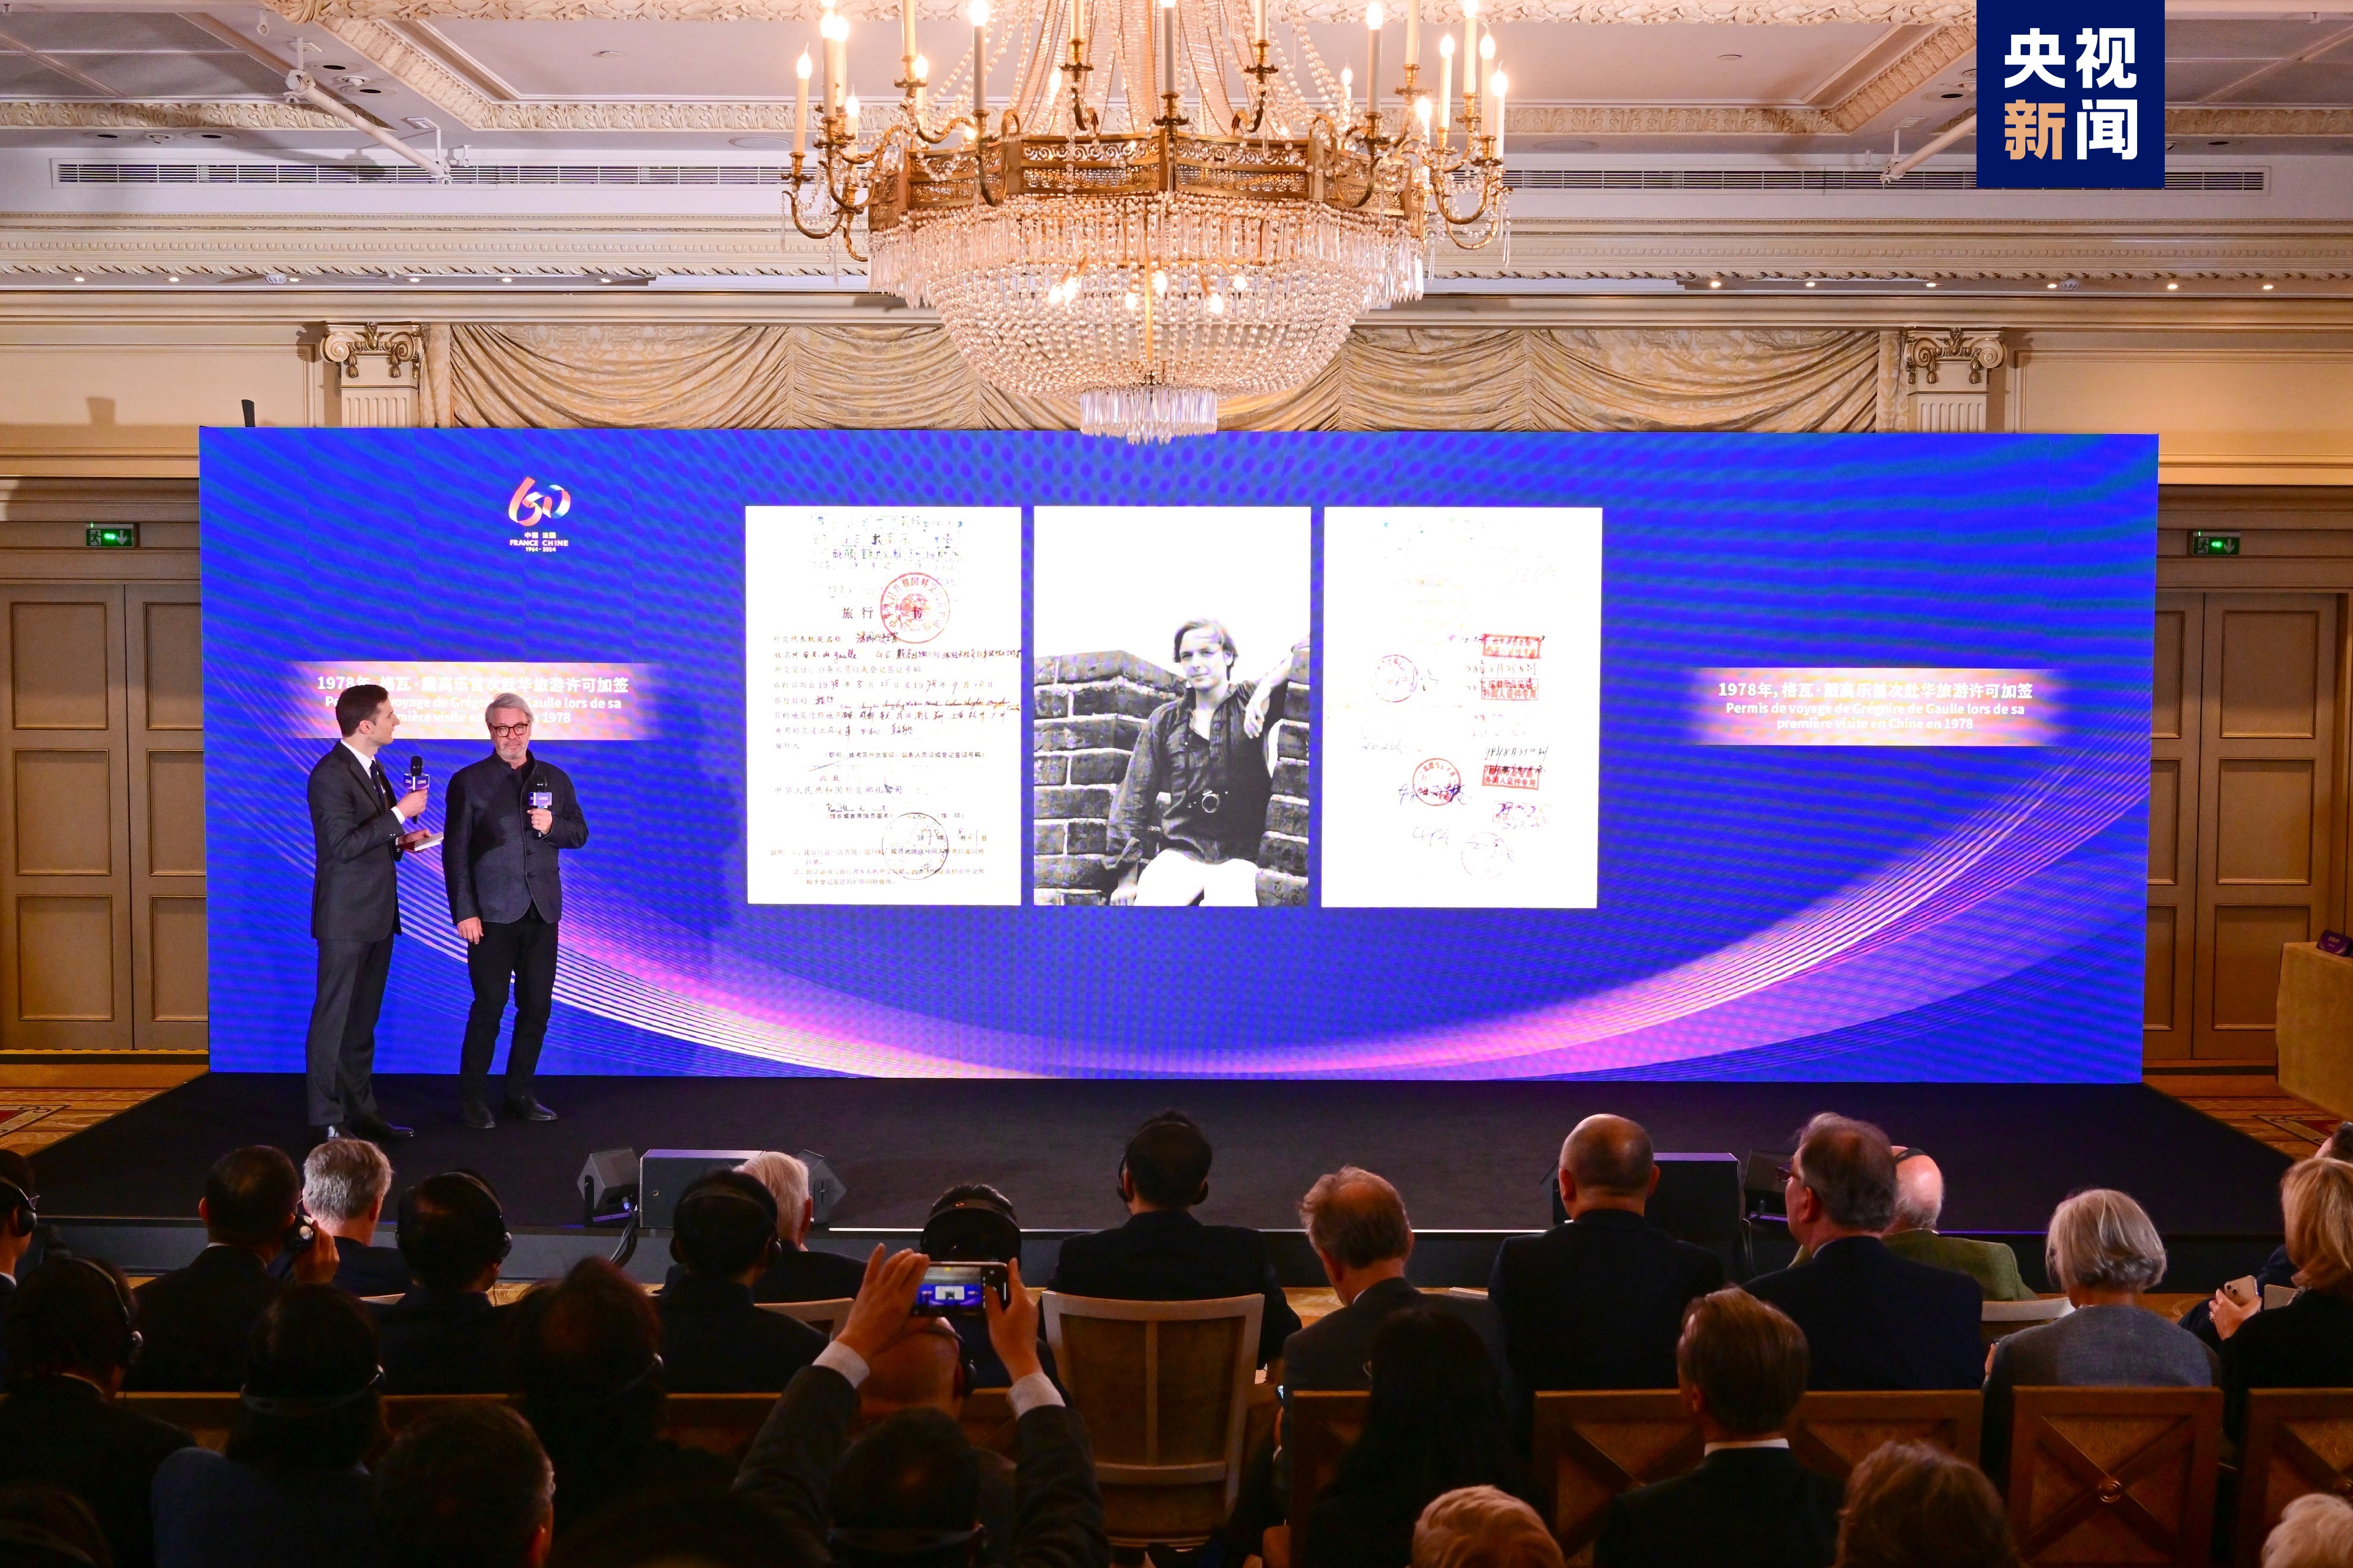 Grégoire de Gaulle, grandnephew of late French President Charles de Gaulle, shares stories of three generations of Sino-French friendship in his family, Paris, France, May 6, 2024. /CMG